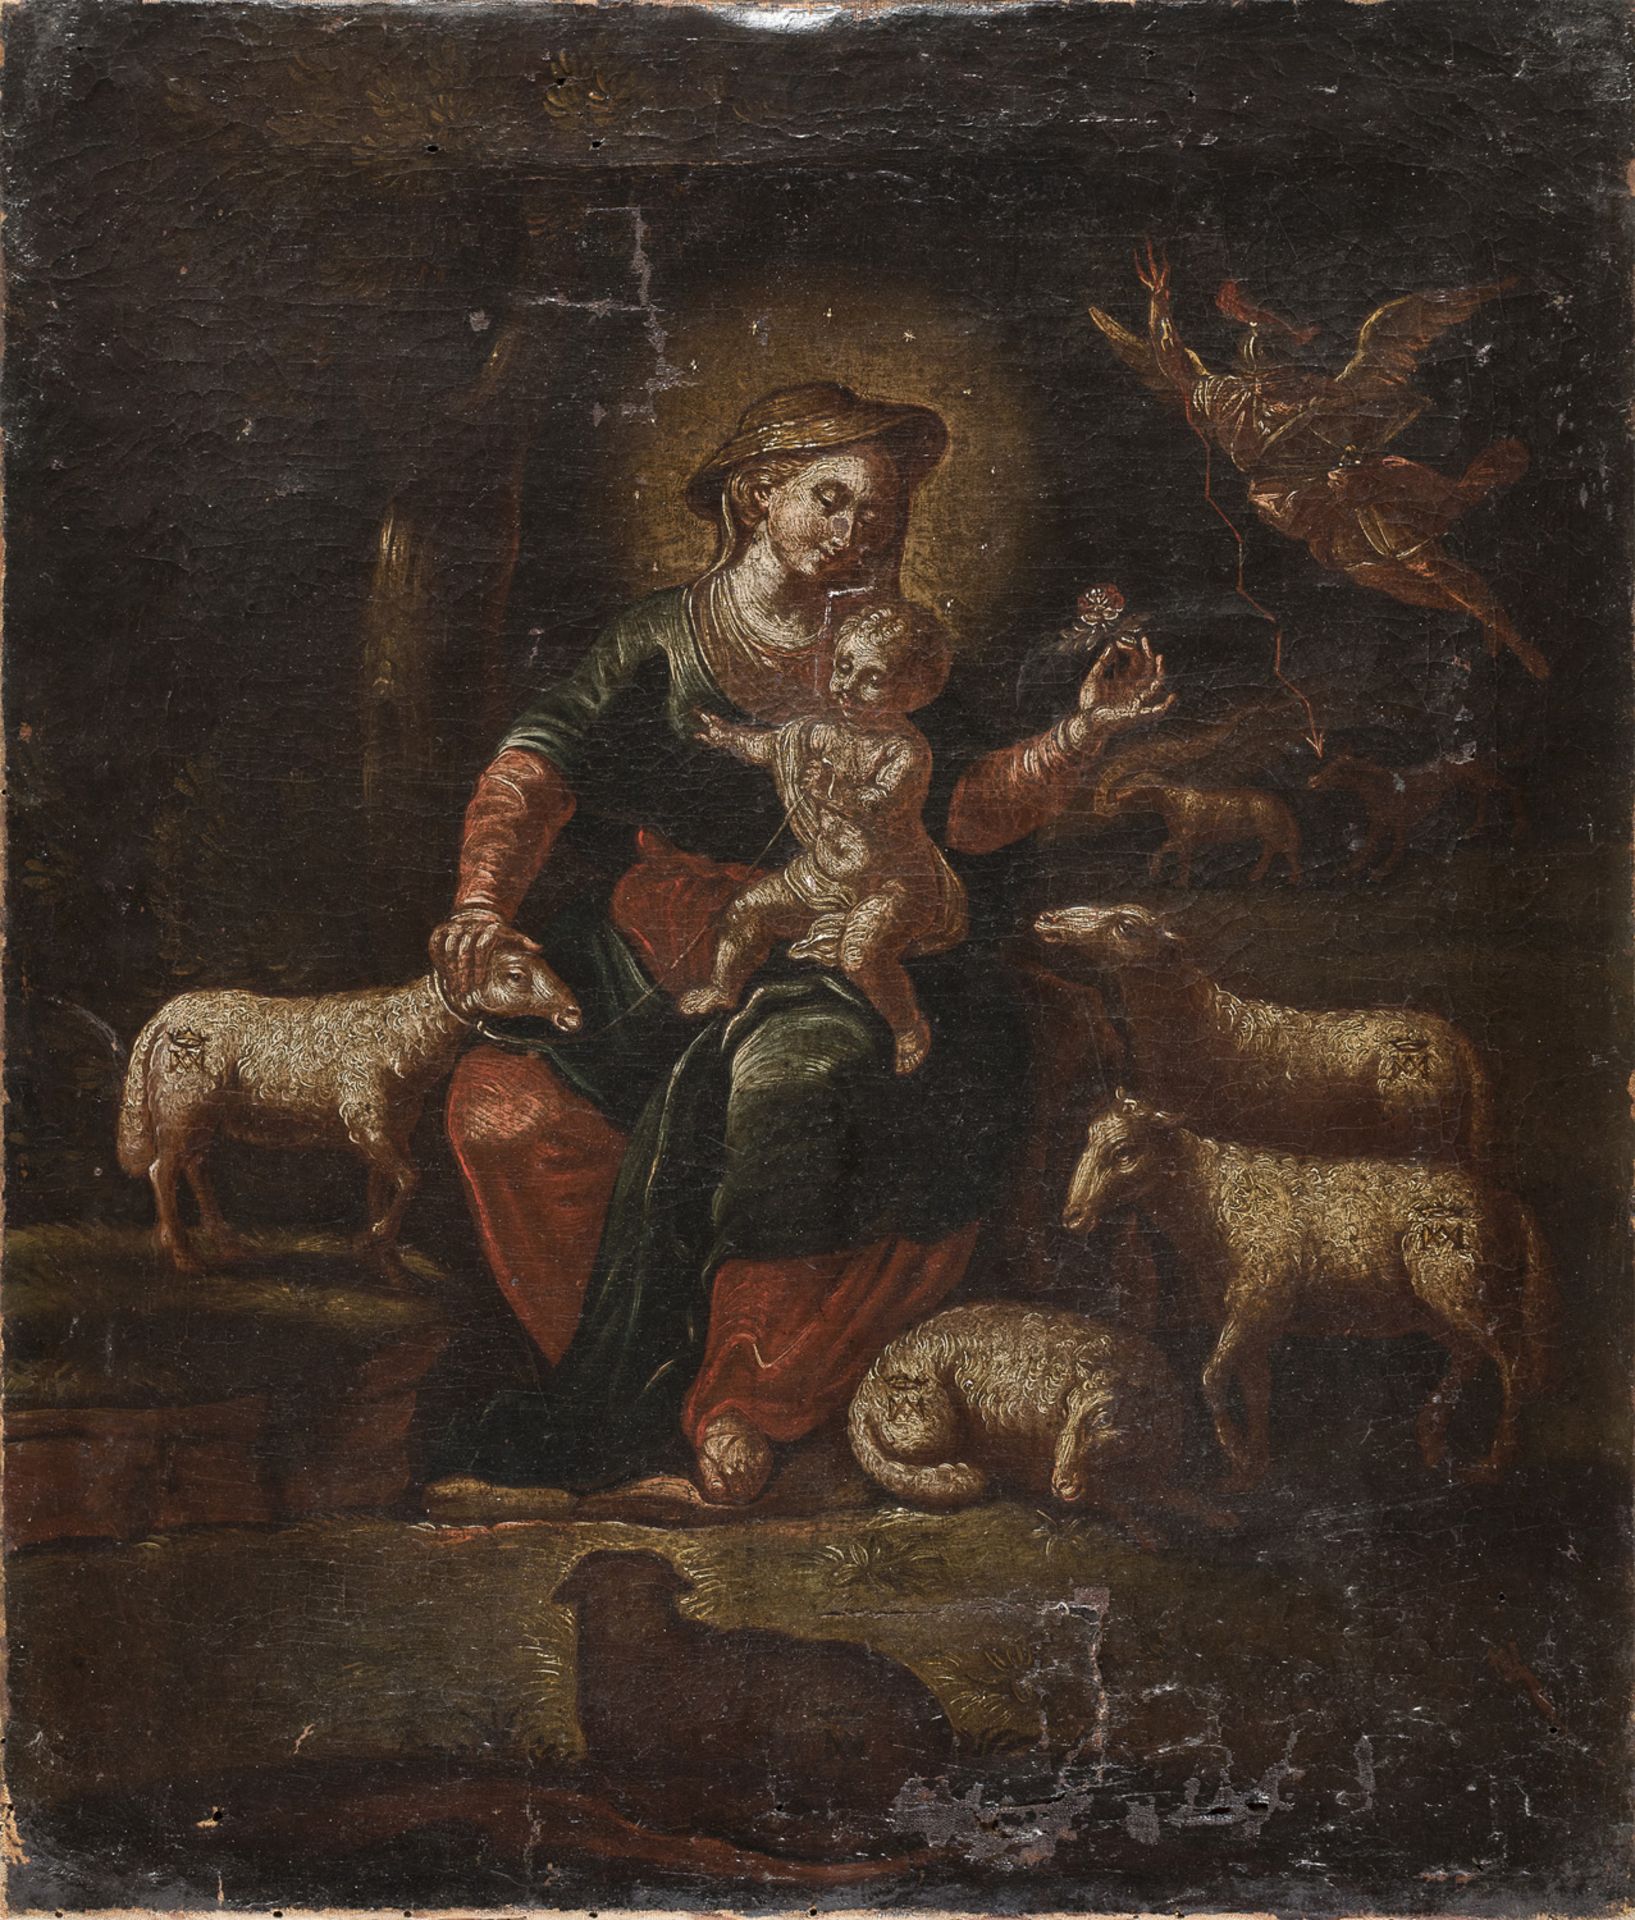 OIL PAINTING OF THE VIRGIN IN THE CLOTHES OF A SHEPHERDESS 18TH CENTURY